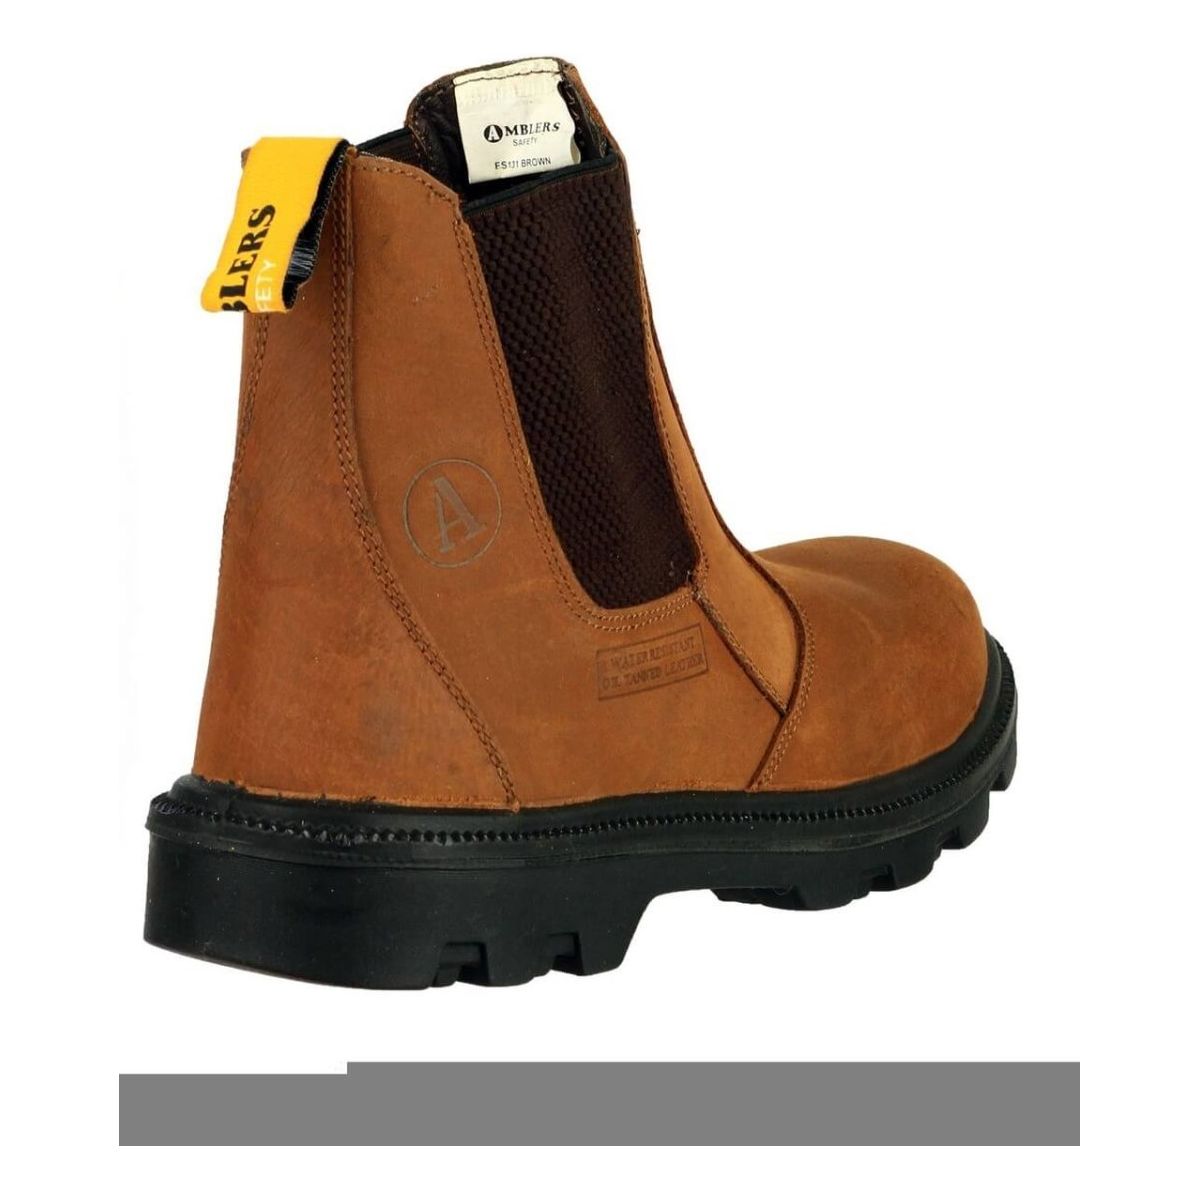 Amblers Fs131 Water-Resistant Safety Dealer Boots Mens - workweargurus.com